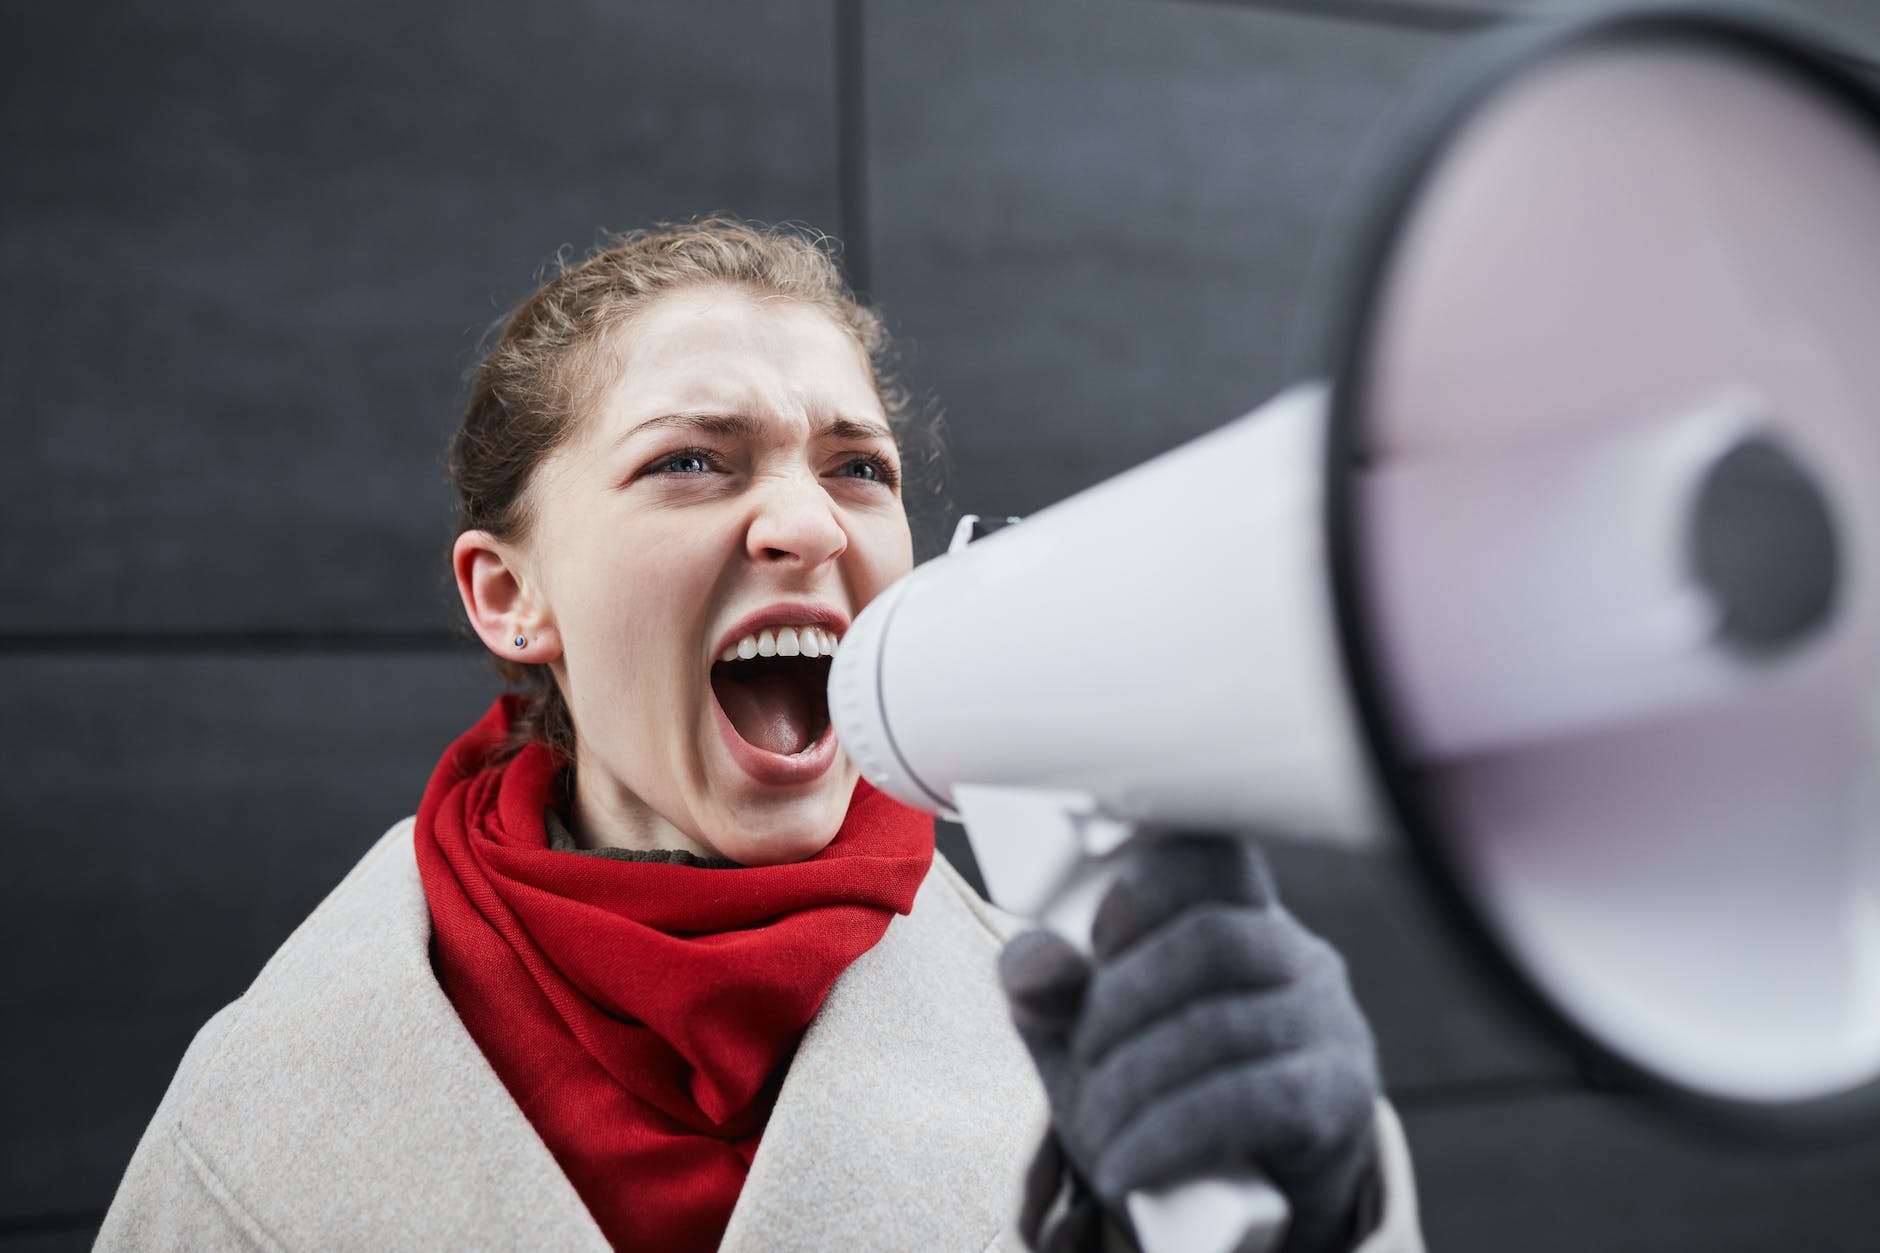 Echo Your Passion: Be Loud and Share Your Voice